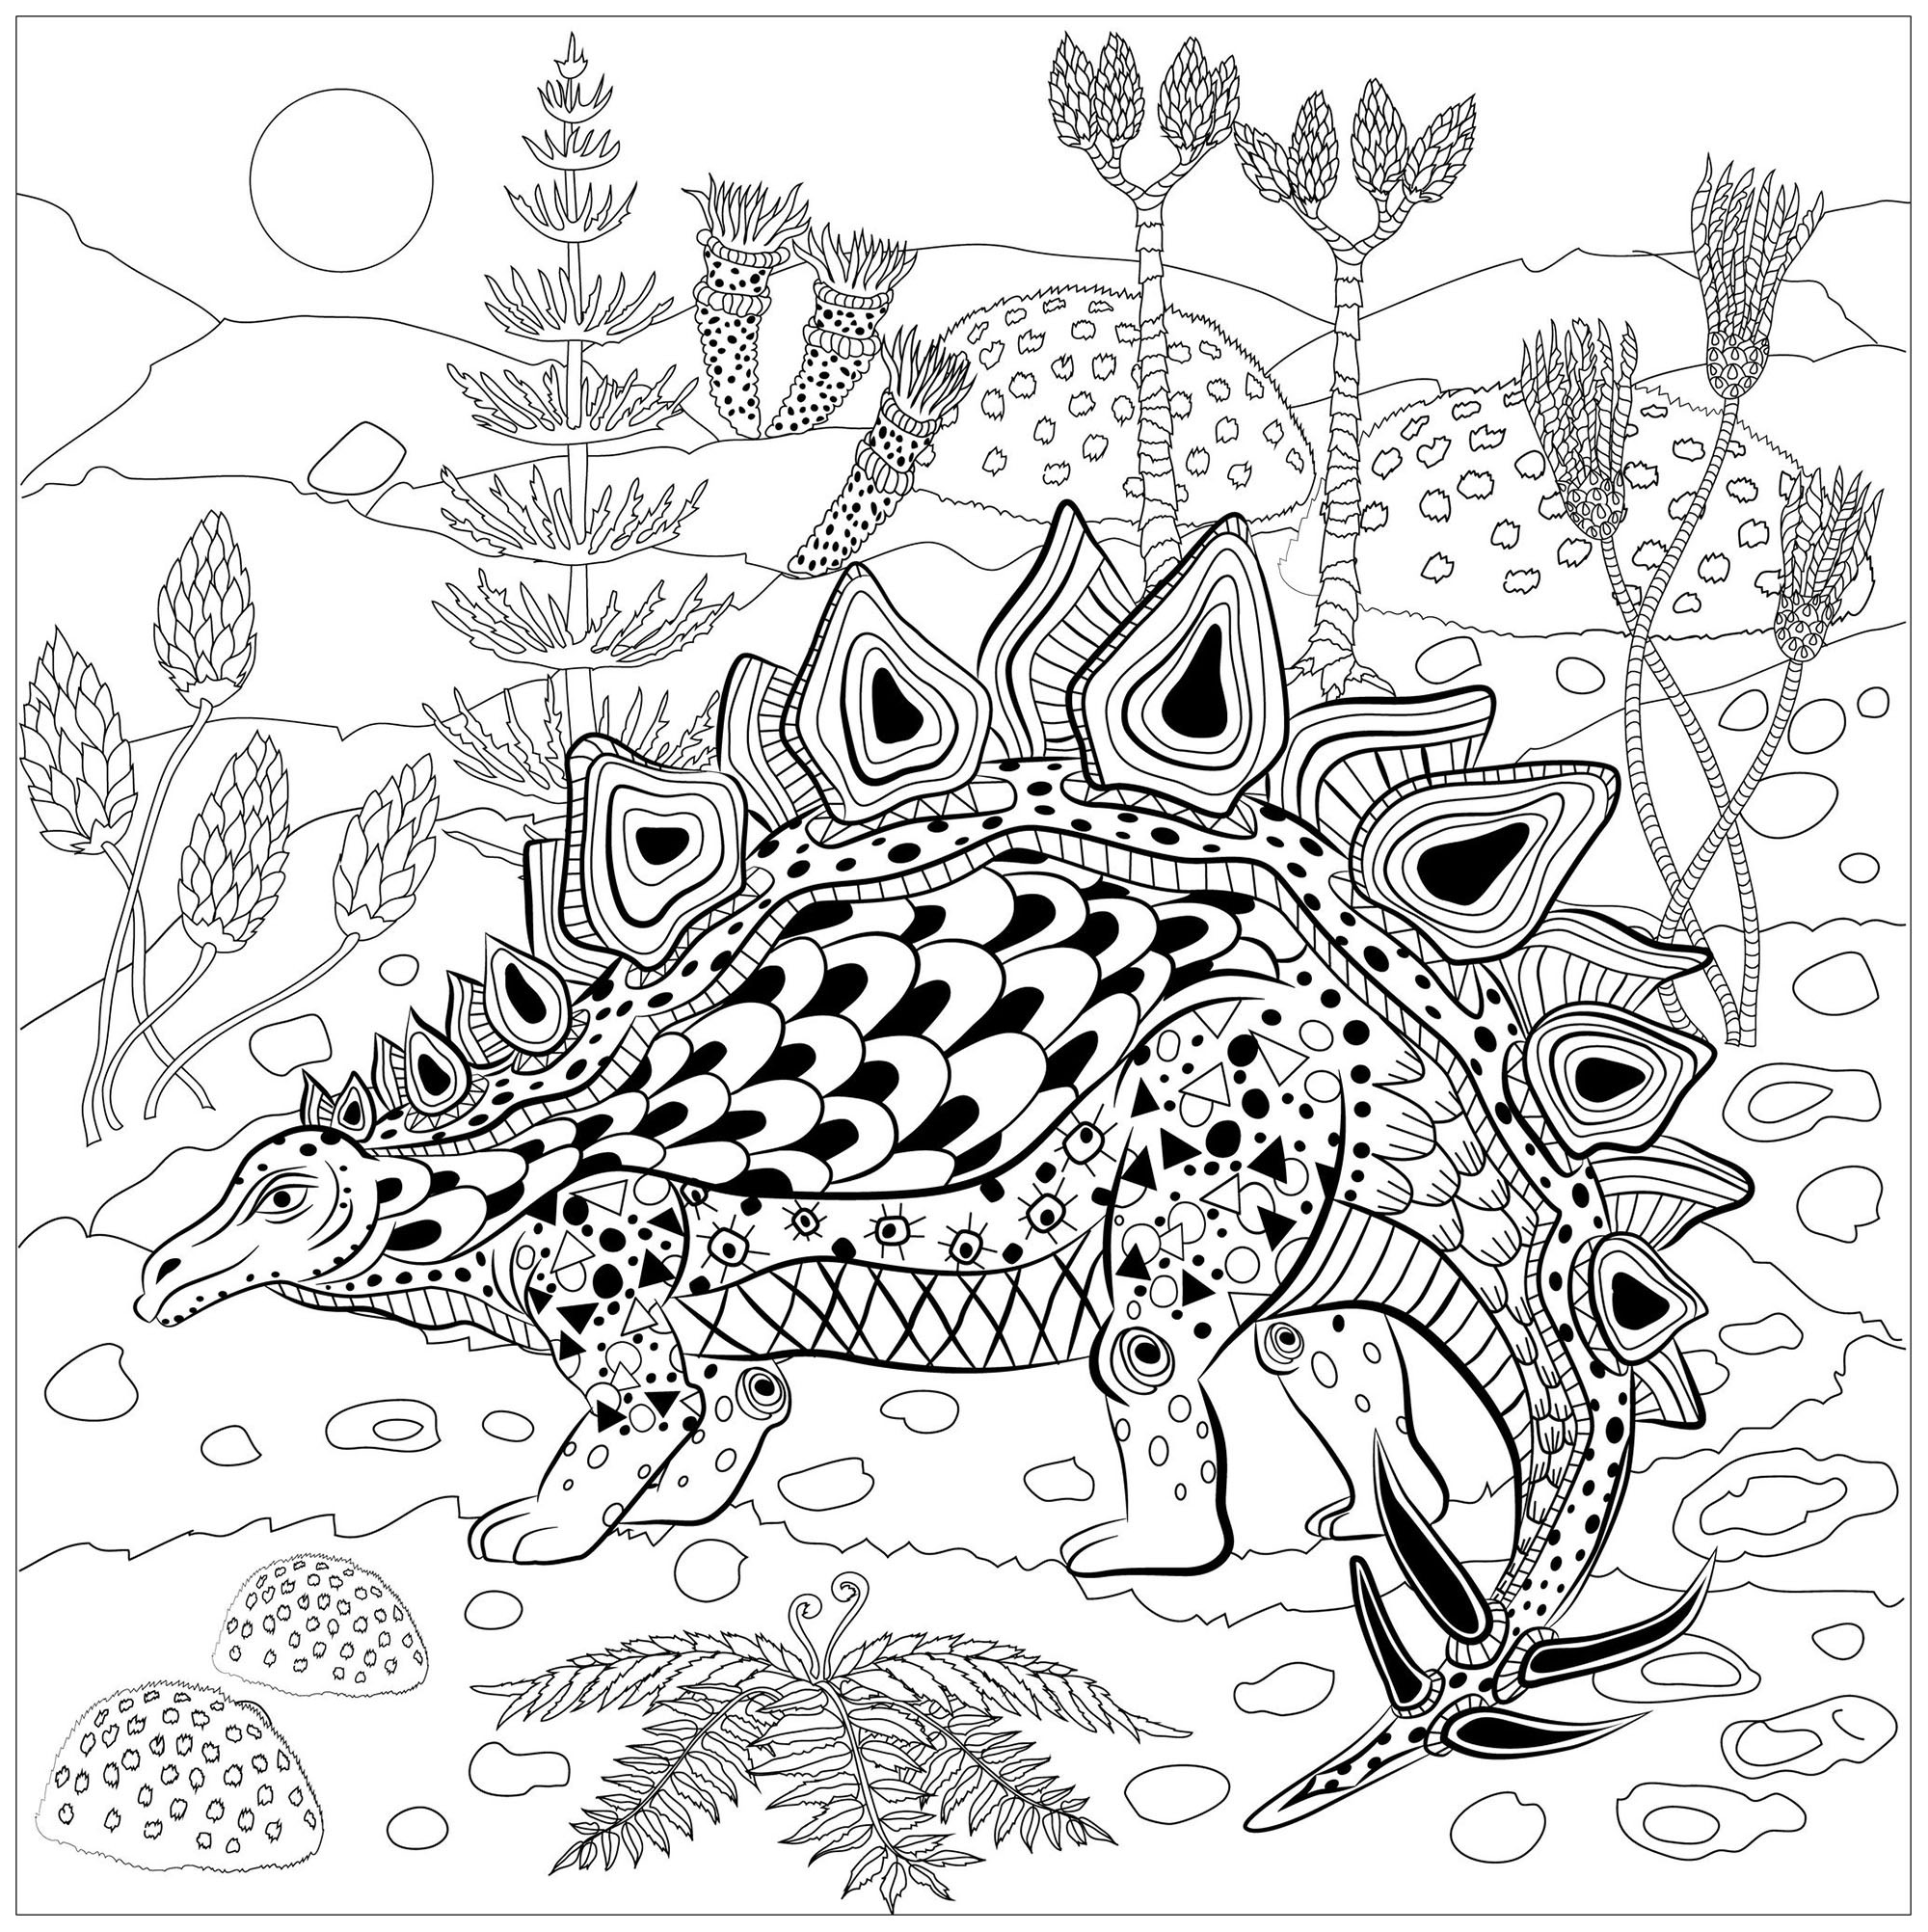 Dinosaur Coloring Pages For Adults
 Stegosaurus in nature Dinosaurs Adult Coloring Pages